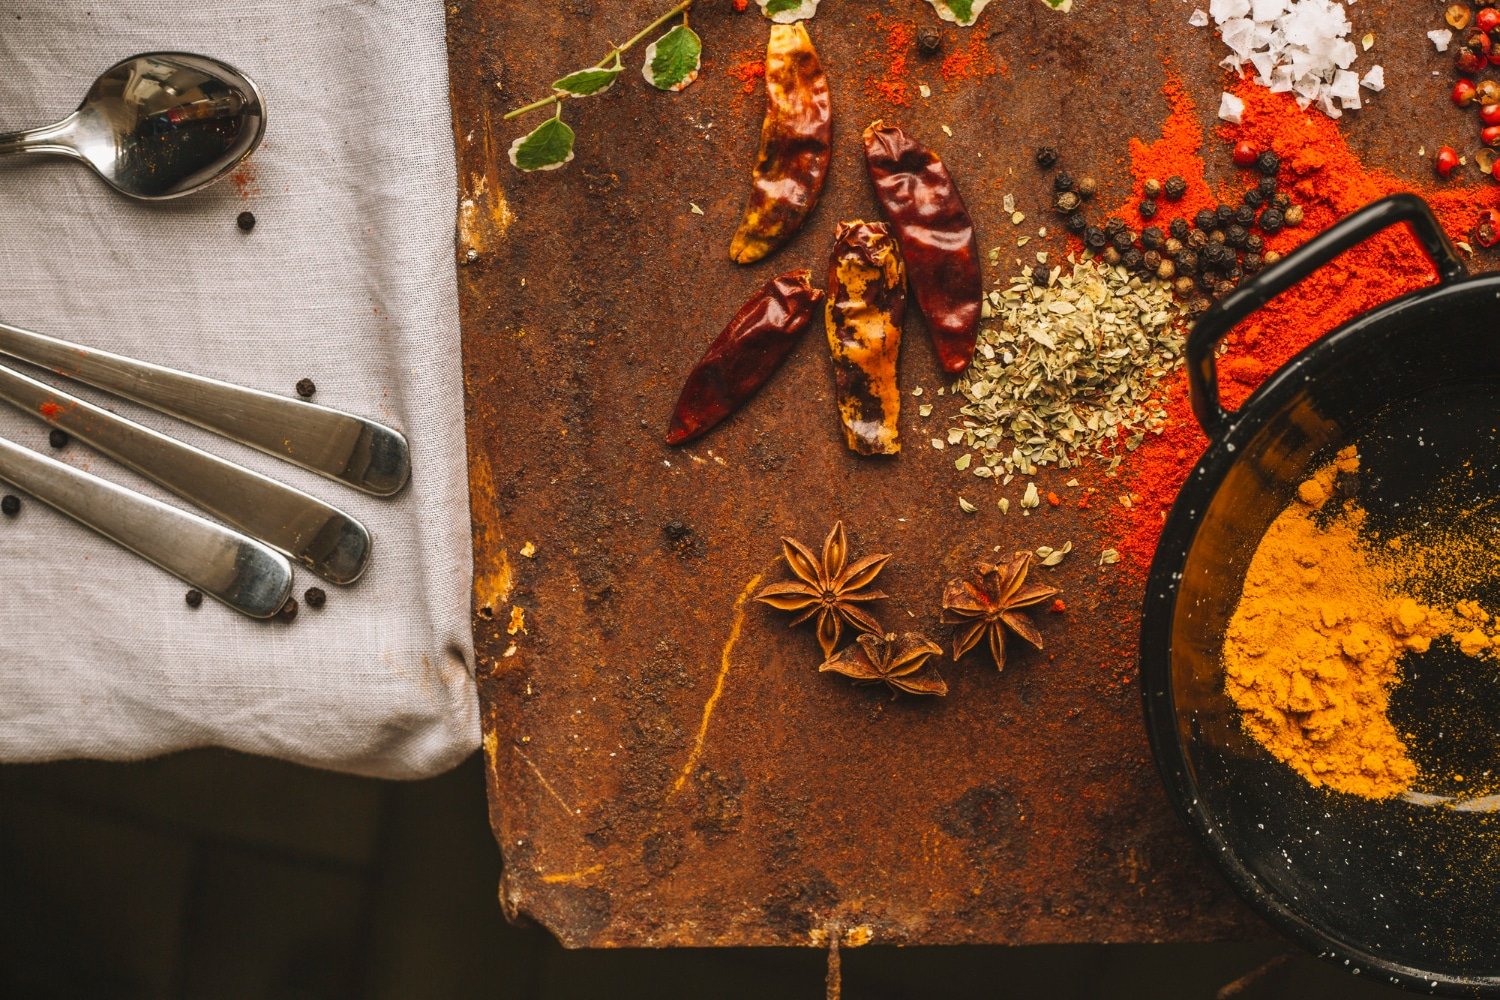 Cook Flavorful Meals With RawSpiceBar’s Freshly Ground Spice Blends